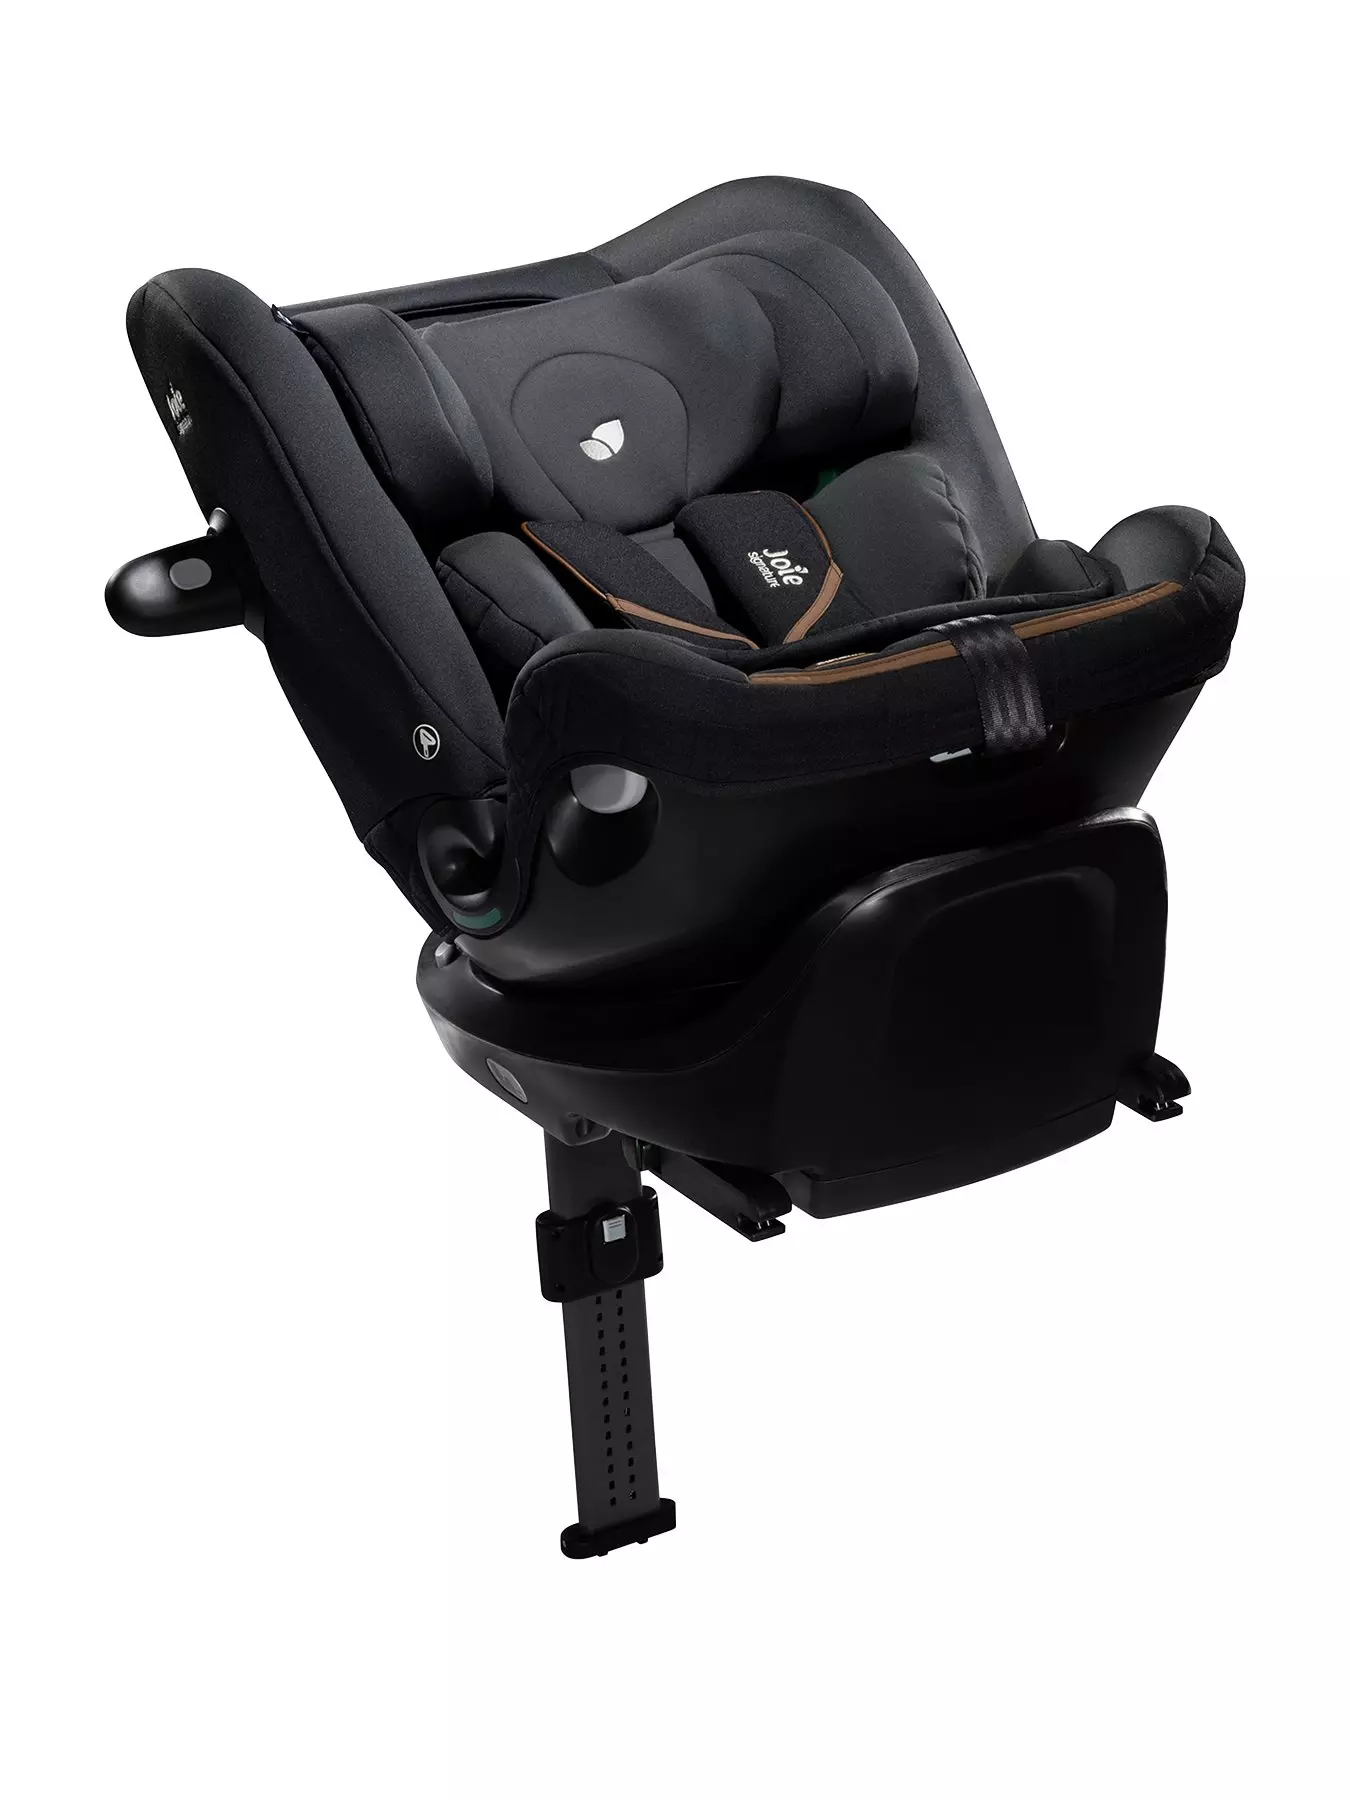 Joie Baby Spin 360 GTi i-Size Car Seat, Cobblestone